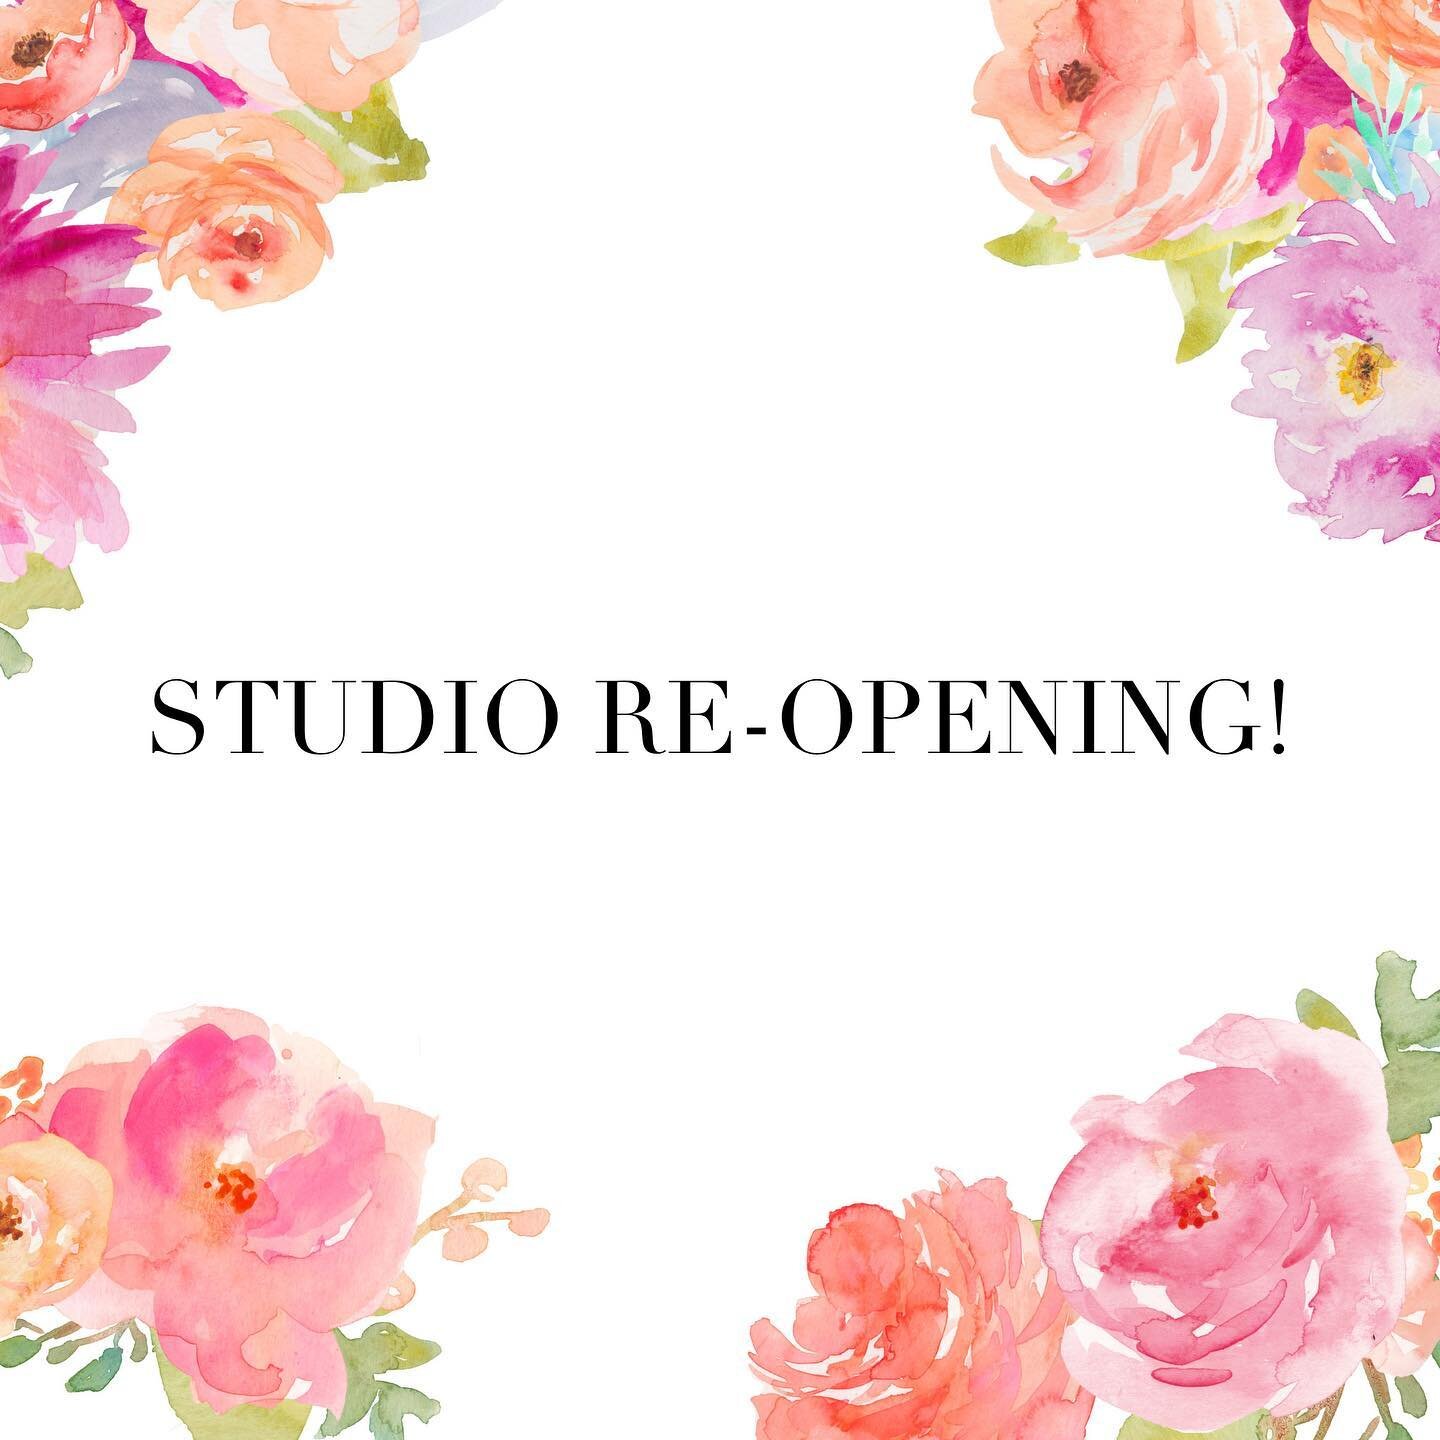 I am beyond excited to announce that after a very long and challenging year (one year to the date that I officially moved out of my beloved 11th-floor studio in the Flood Building), I have signed a new lease and will be re-opening my studio doors lat